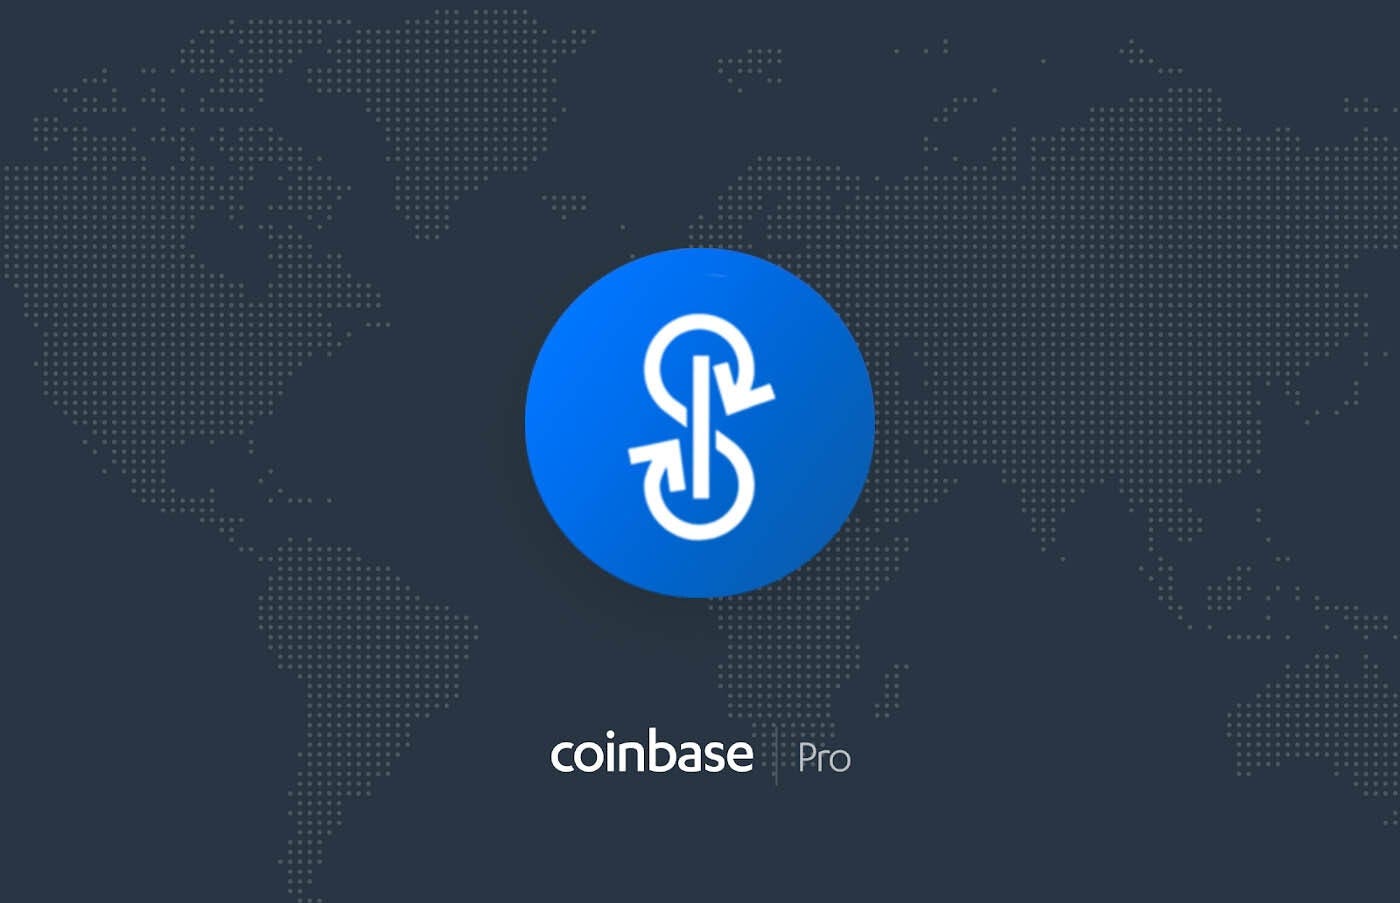 yearn.finance (YFI) is launching on Coinbase Pro | by Coinbase | The Coinbase Blog